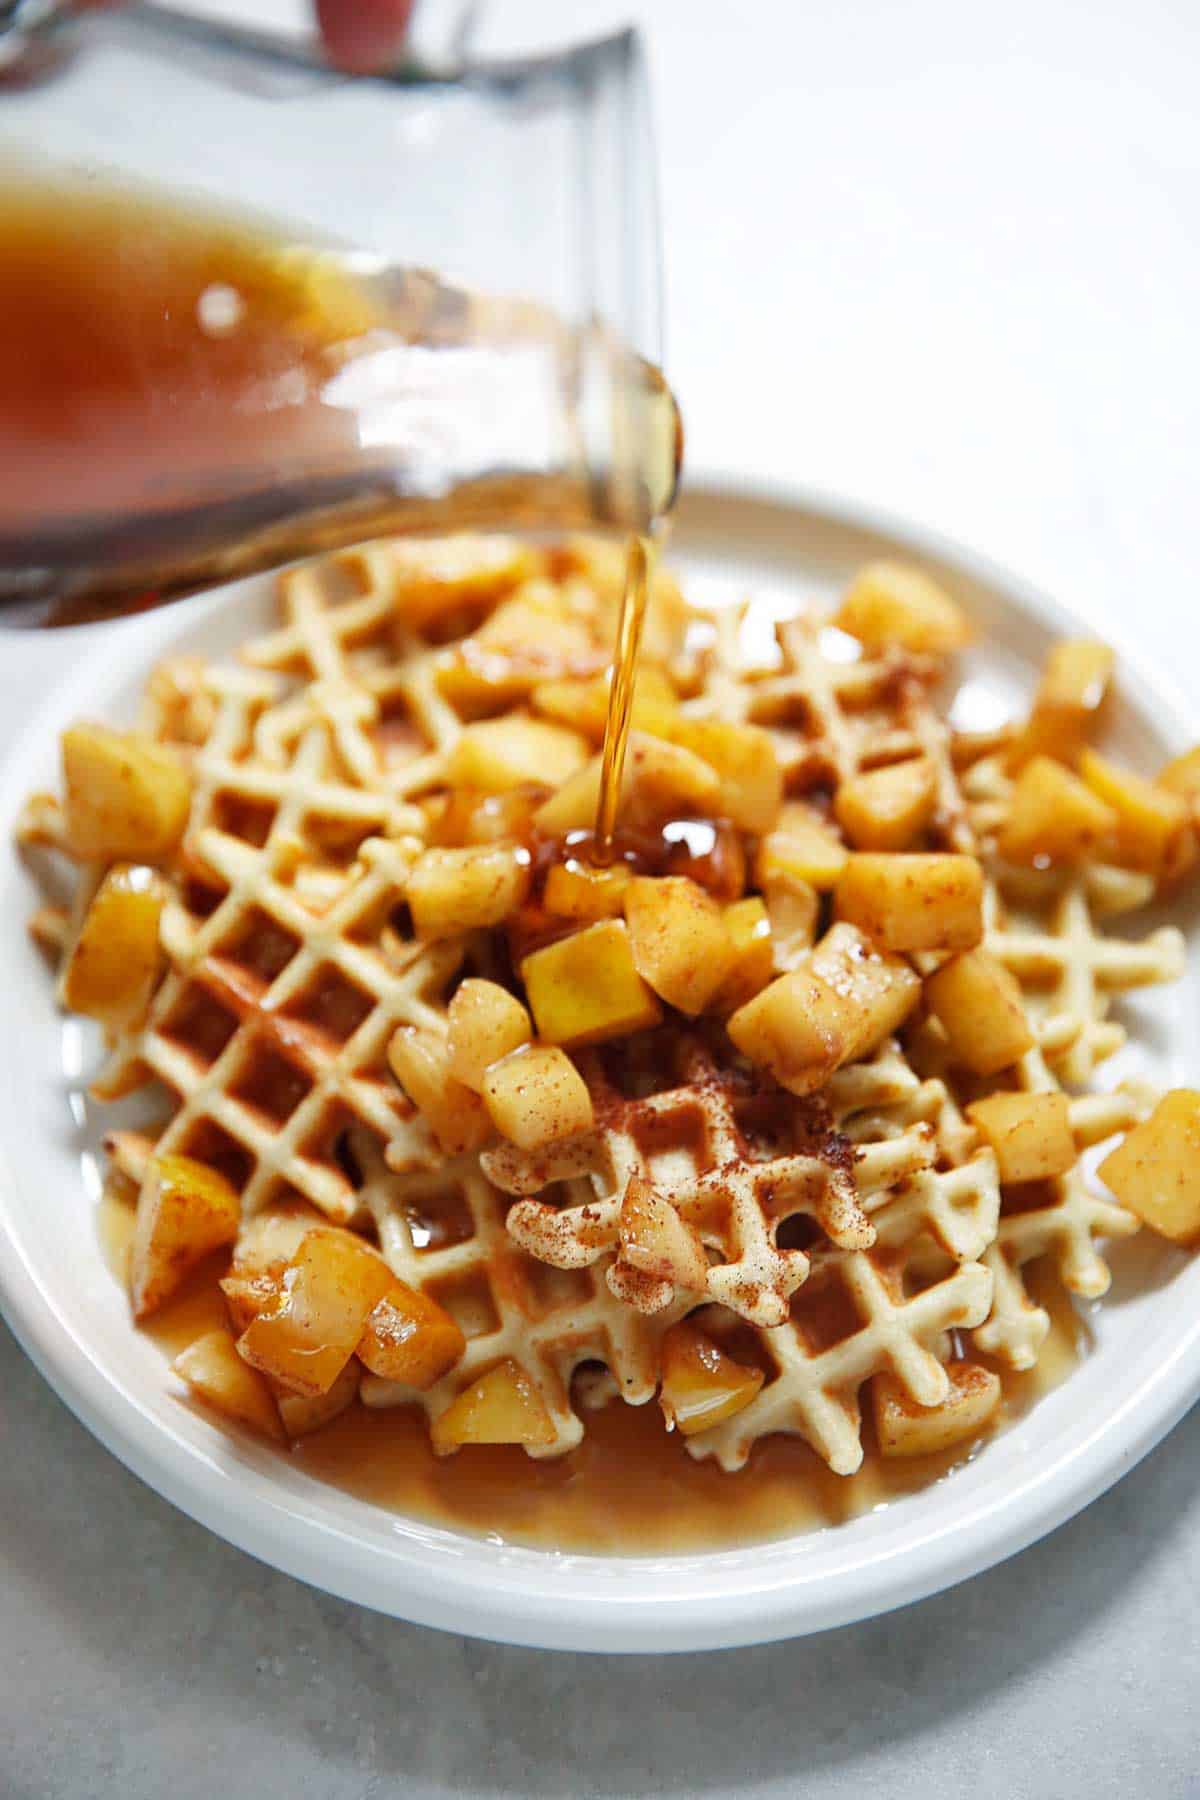 Mini waffles on a plate with apples and syrup